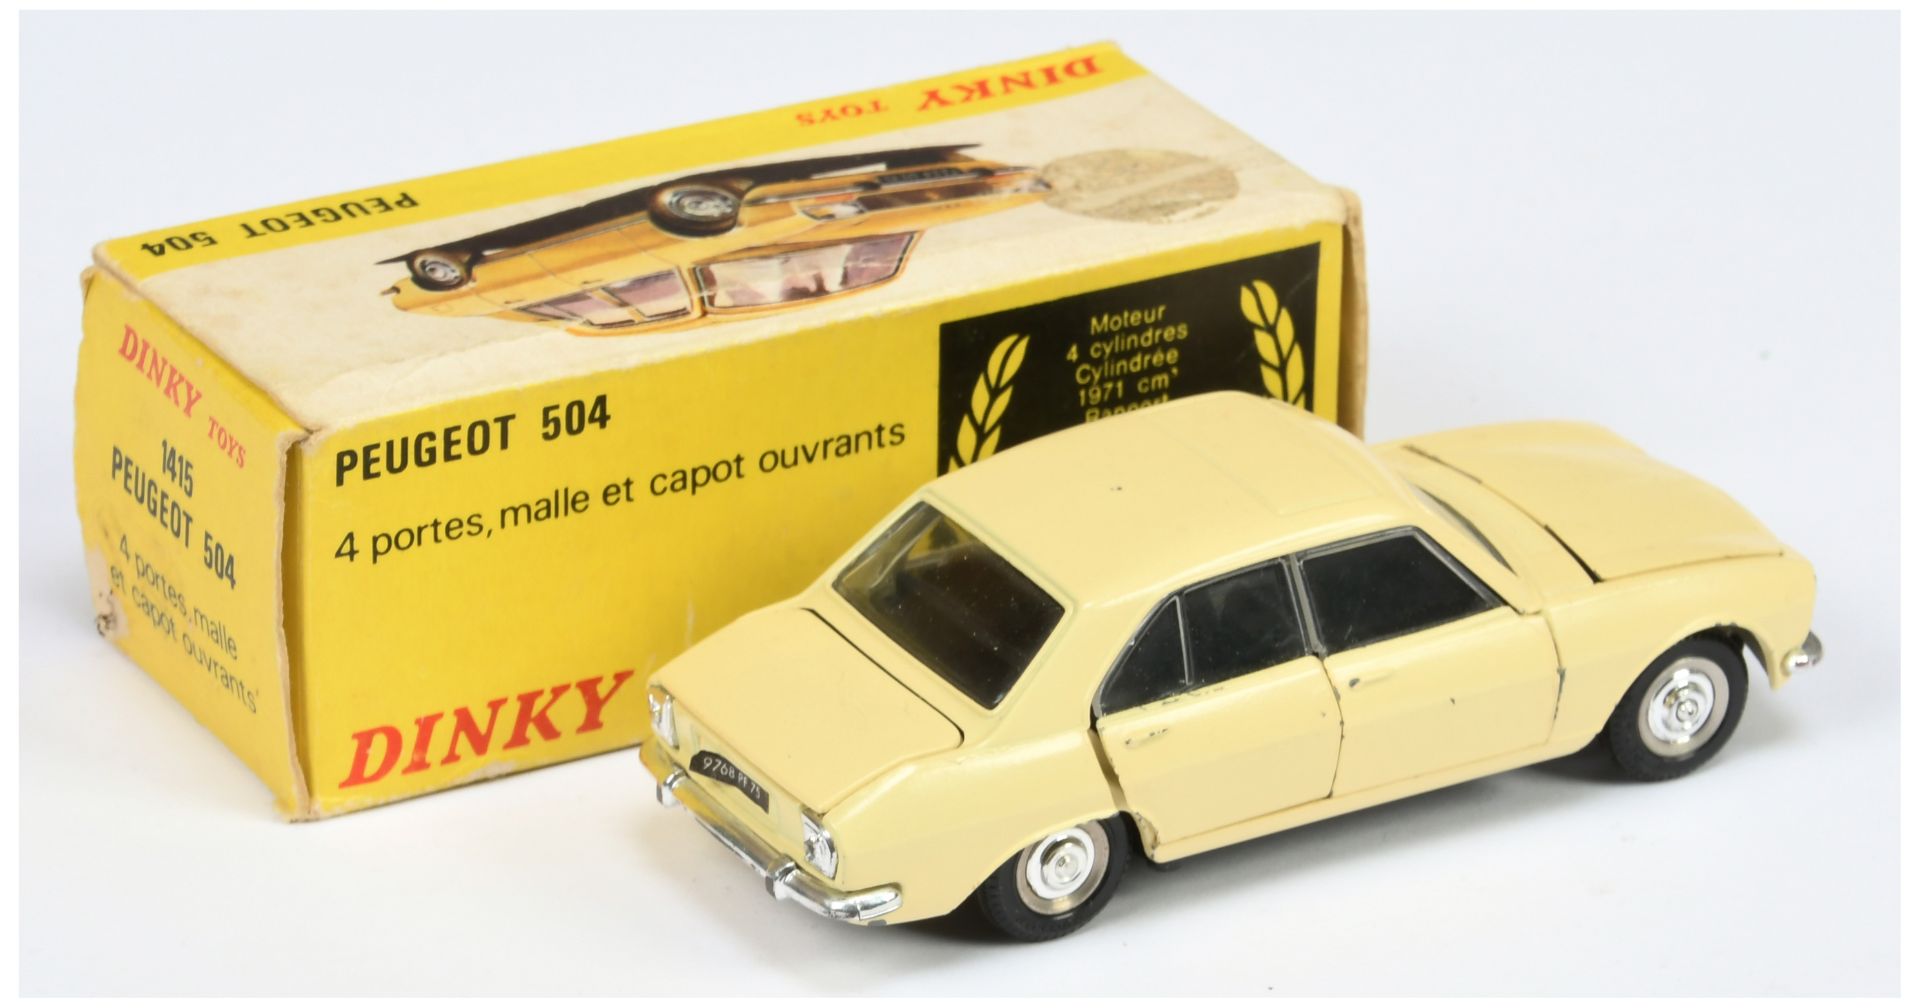 Spanish Dinky Toys 1415 Peugeot 504 Saloon - Cream body, black interior, chrome trim and hubs - Image 2 of 2